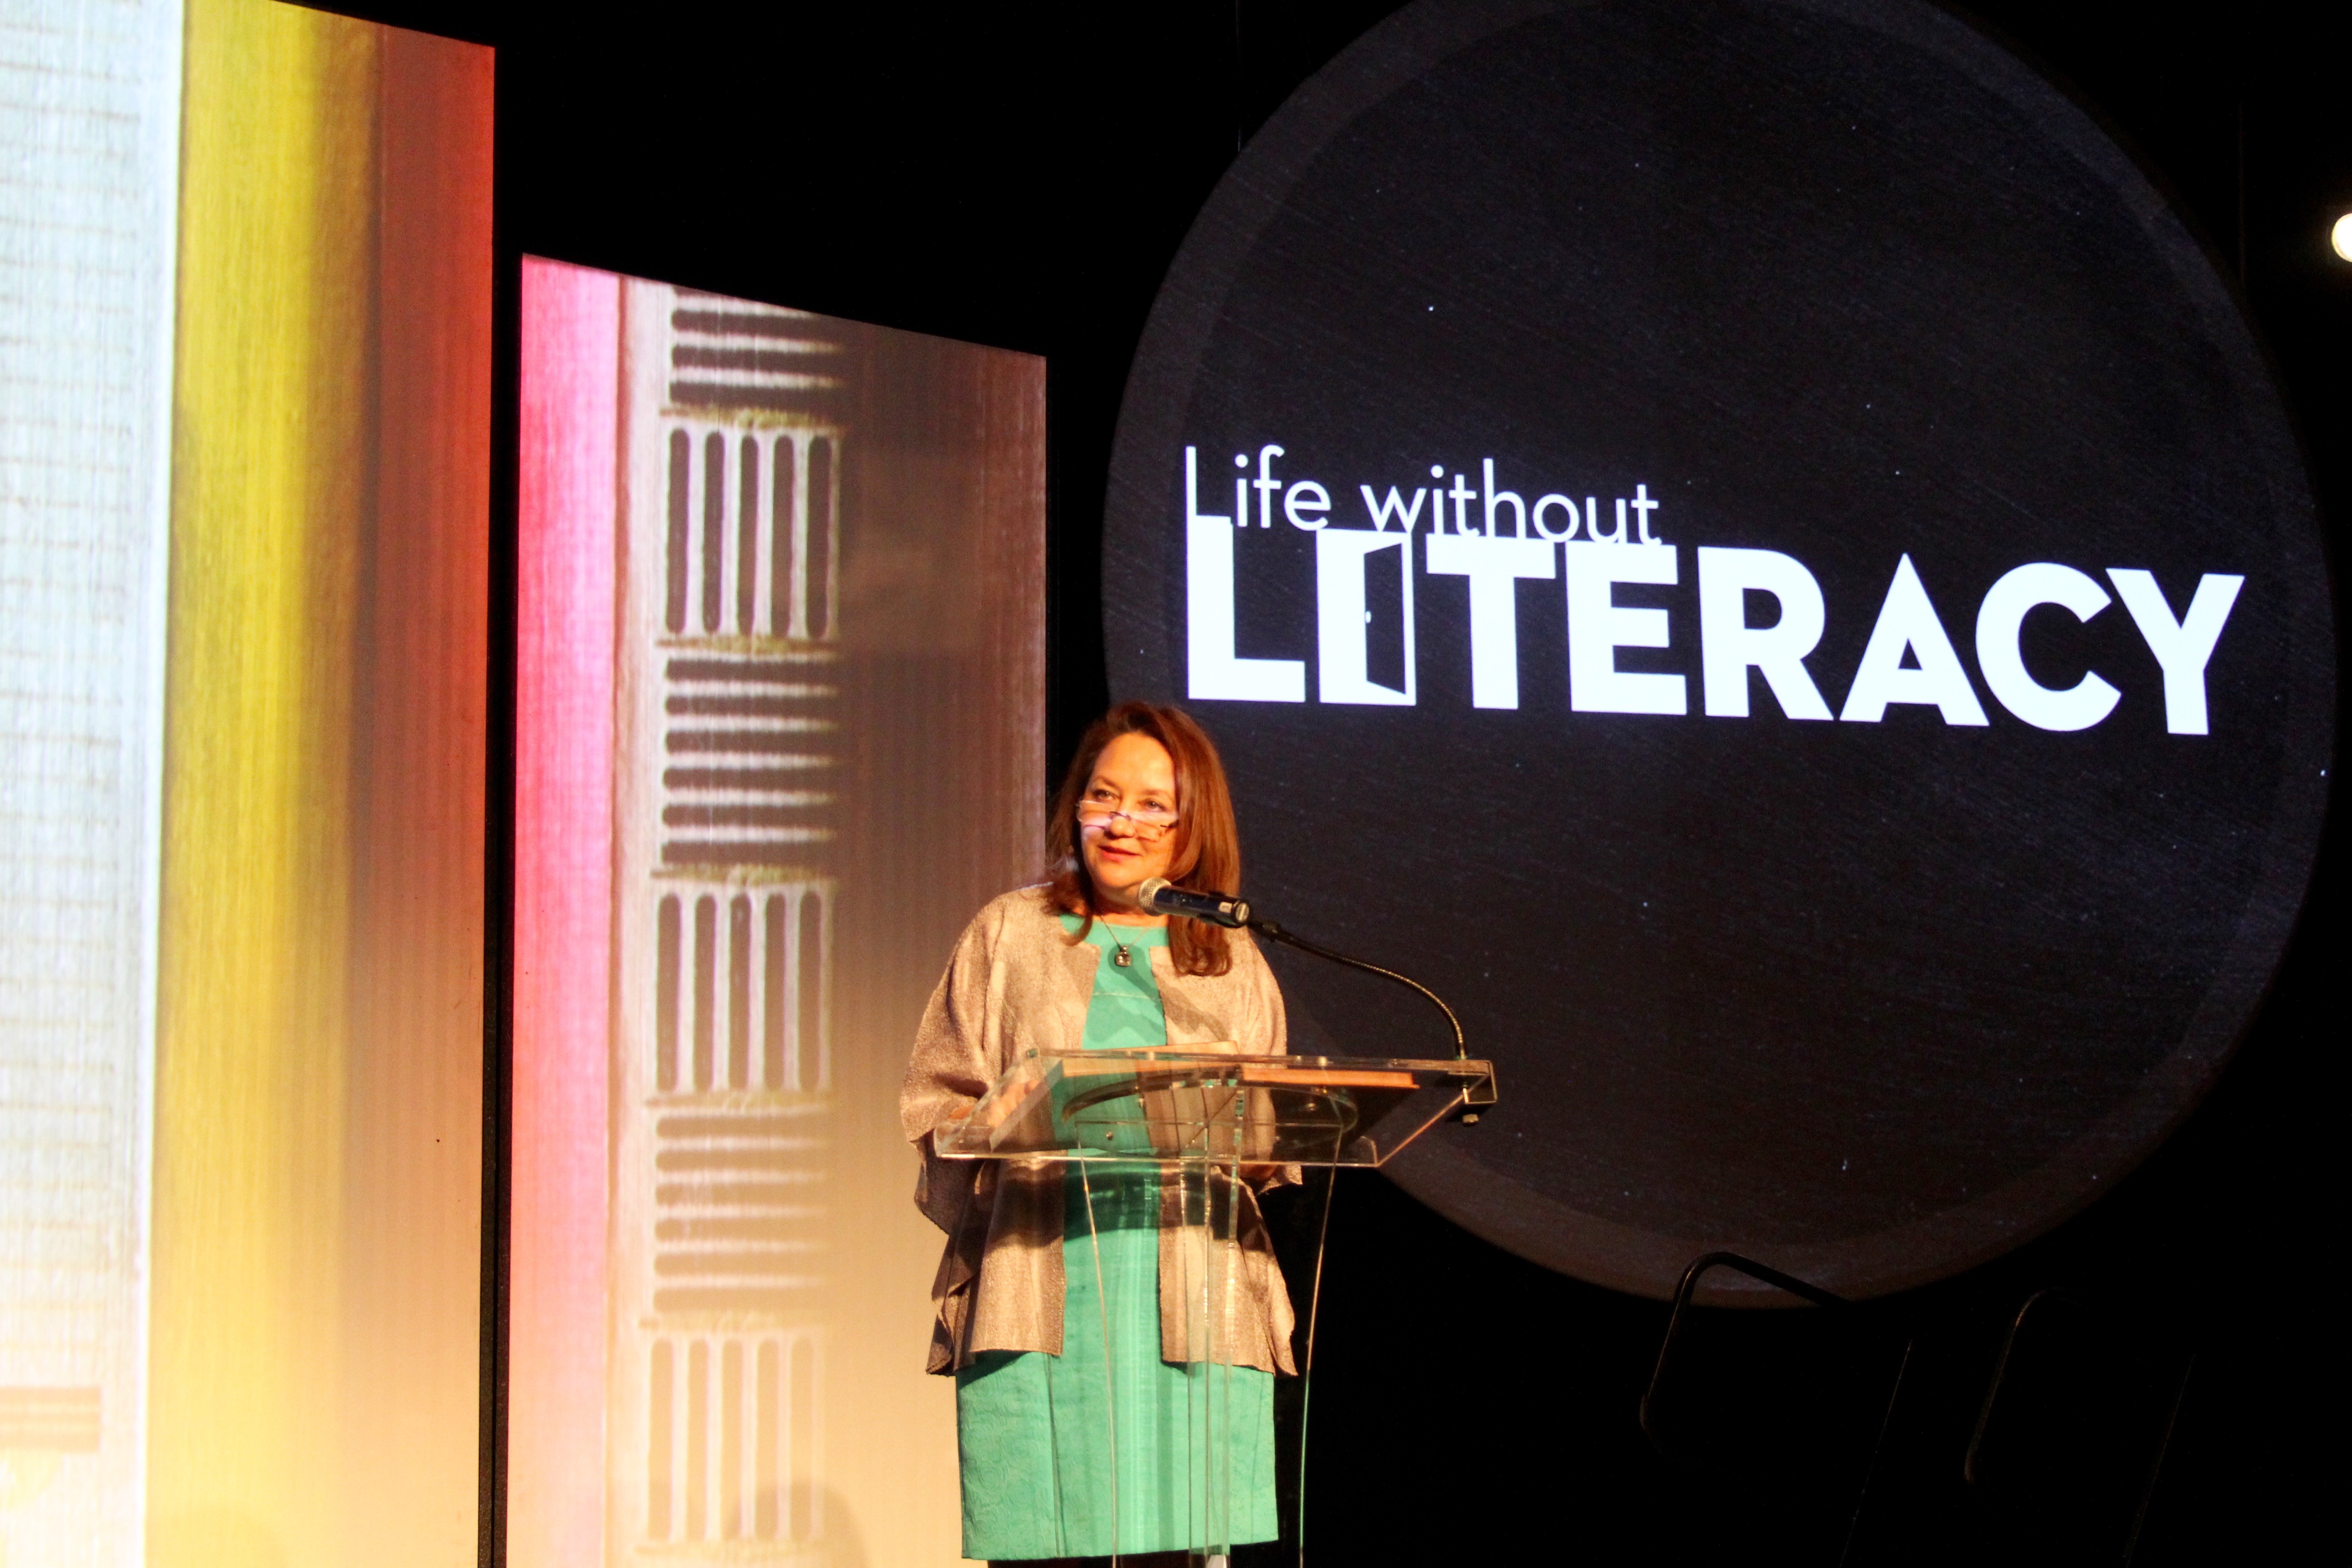 Texas First Lady, Cecilia Abbott, Speaks at the Life Without Literacy event